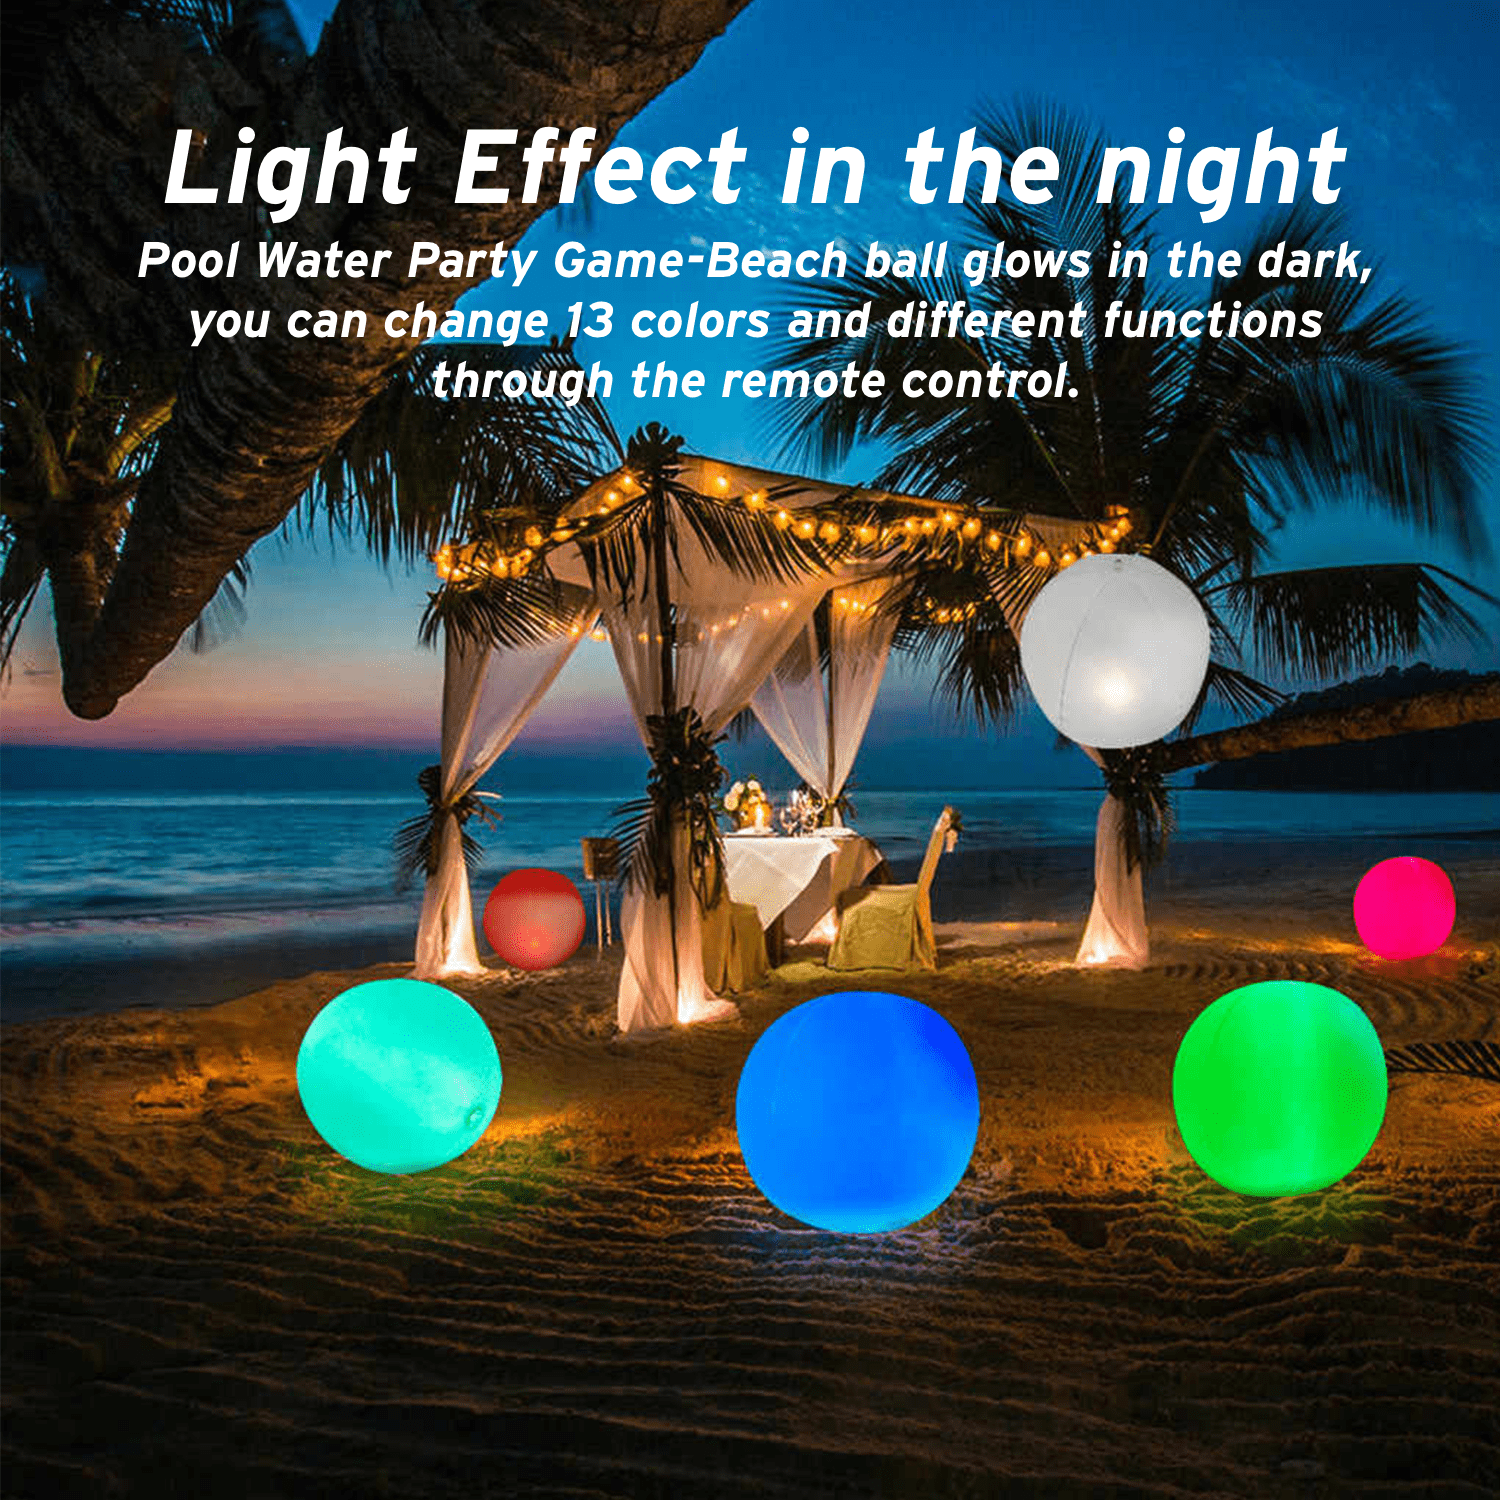 Great for Summer Parties Denpetec Led Toys Inflatable Beach Ball Light,4 Modes Glowing Beach Ball Light,Glow in Dark Pool Games Toys for Teens Adults Pool/Beach Parties 